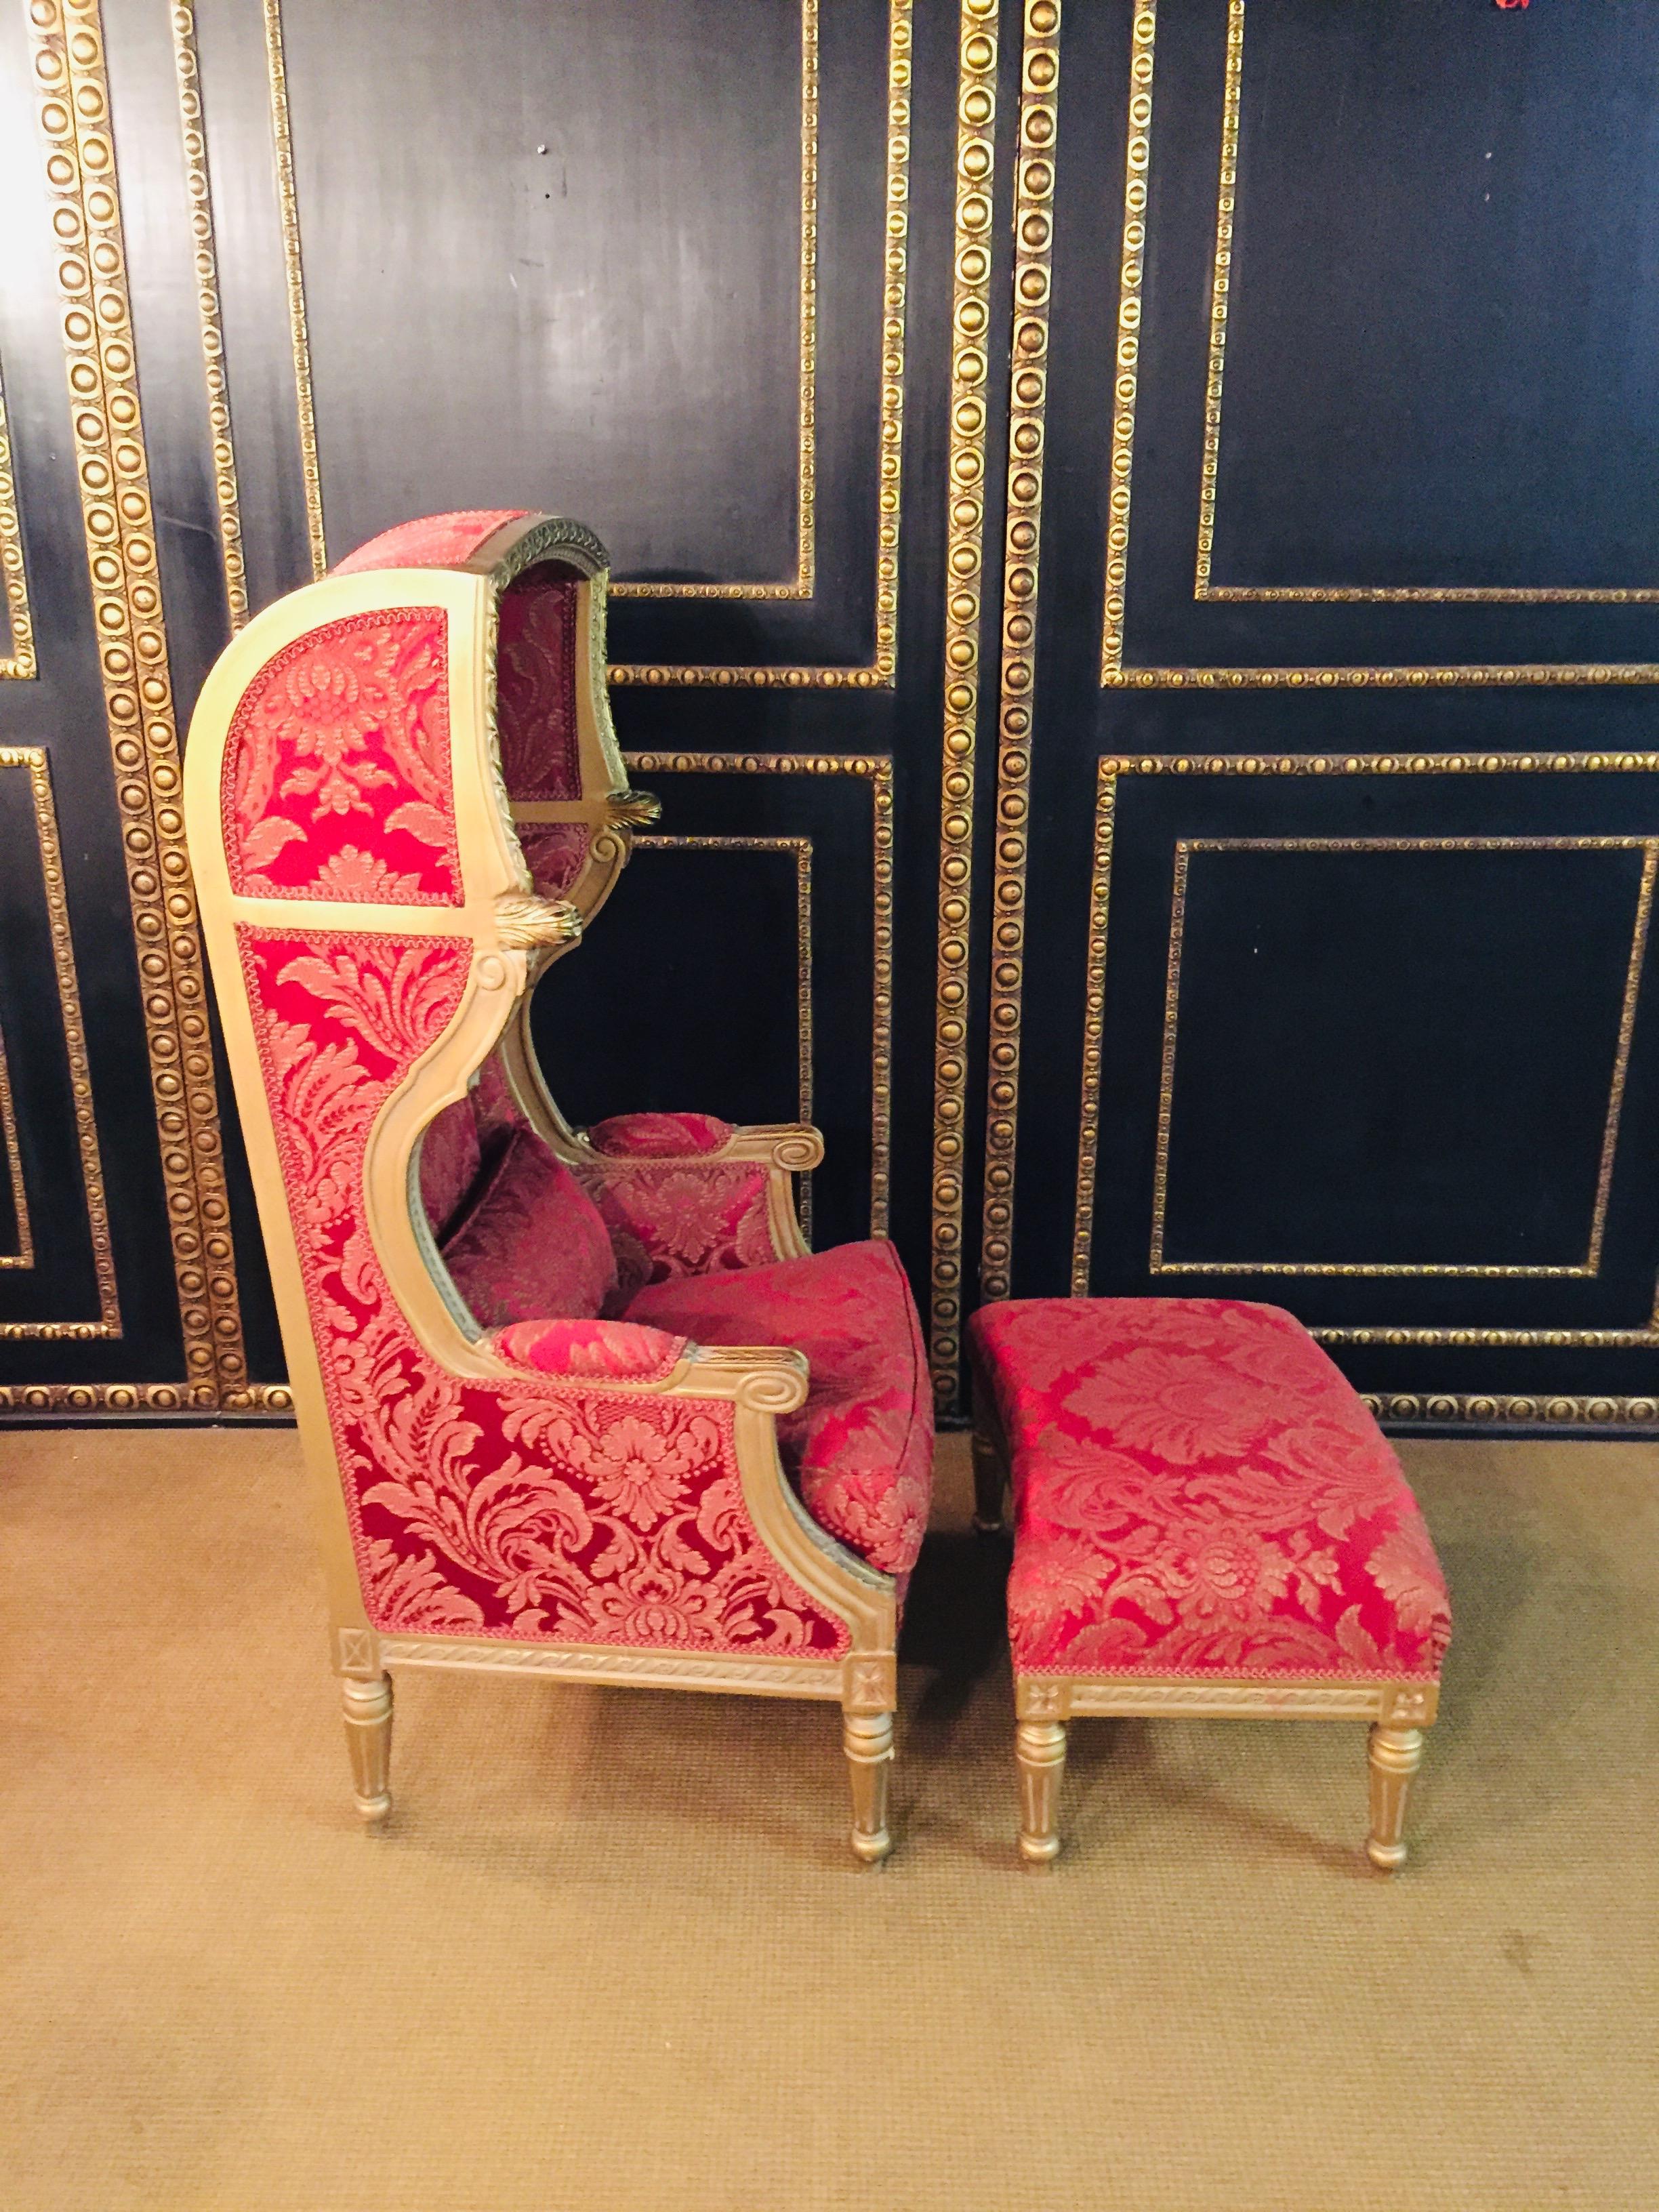 Bergere / Armchair with Stool in the Antique Style of Louis XVI 1